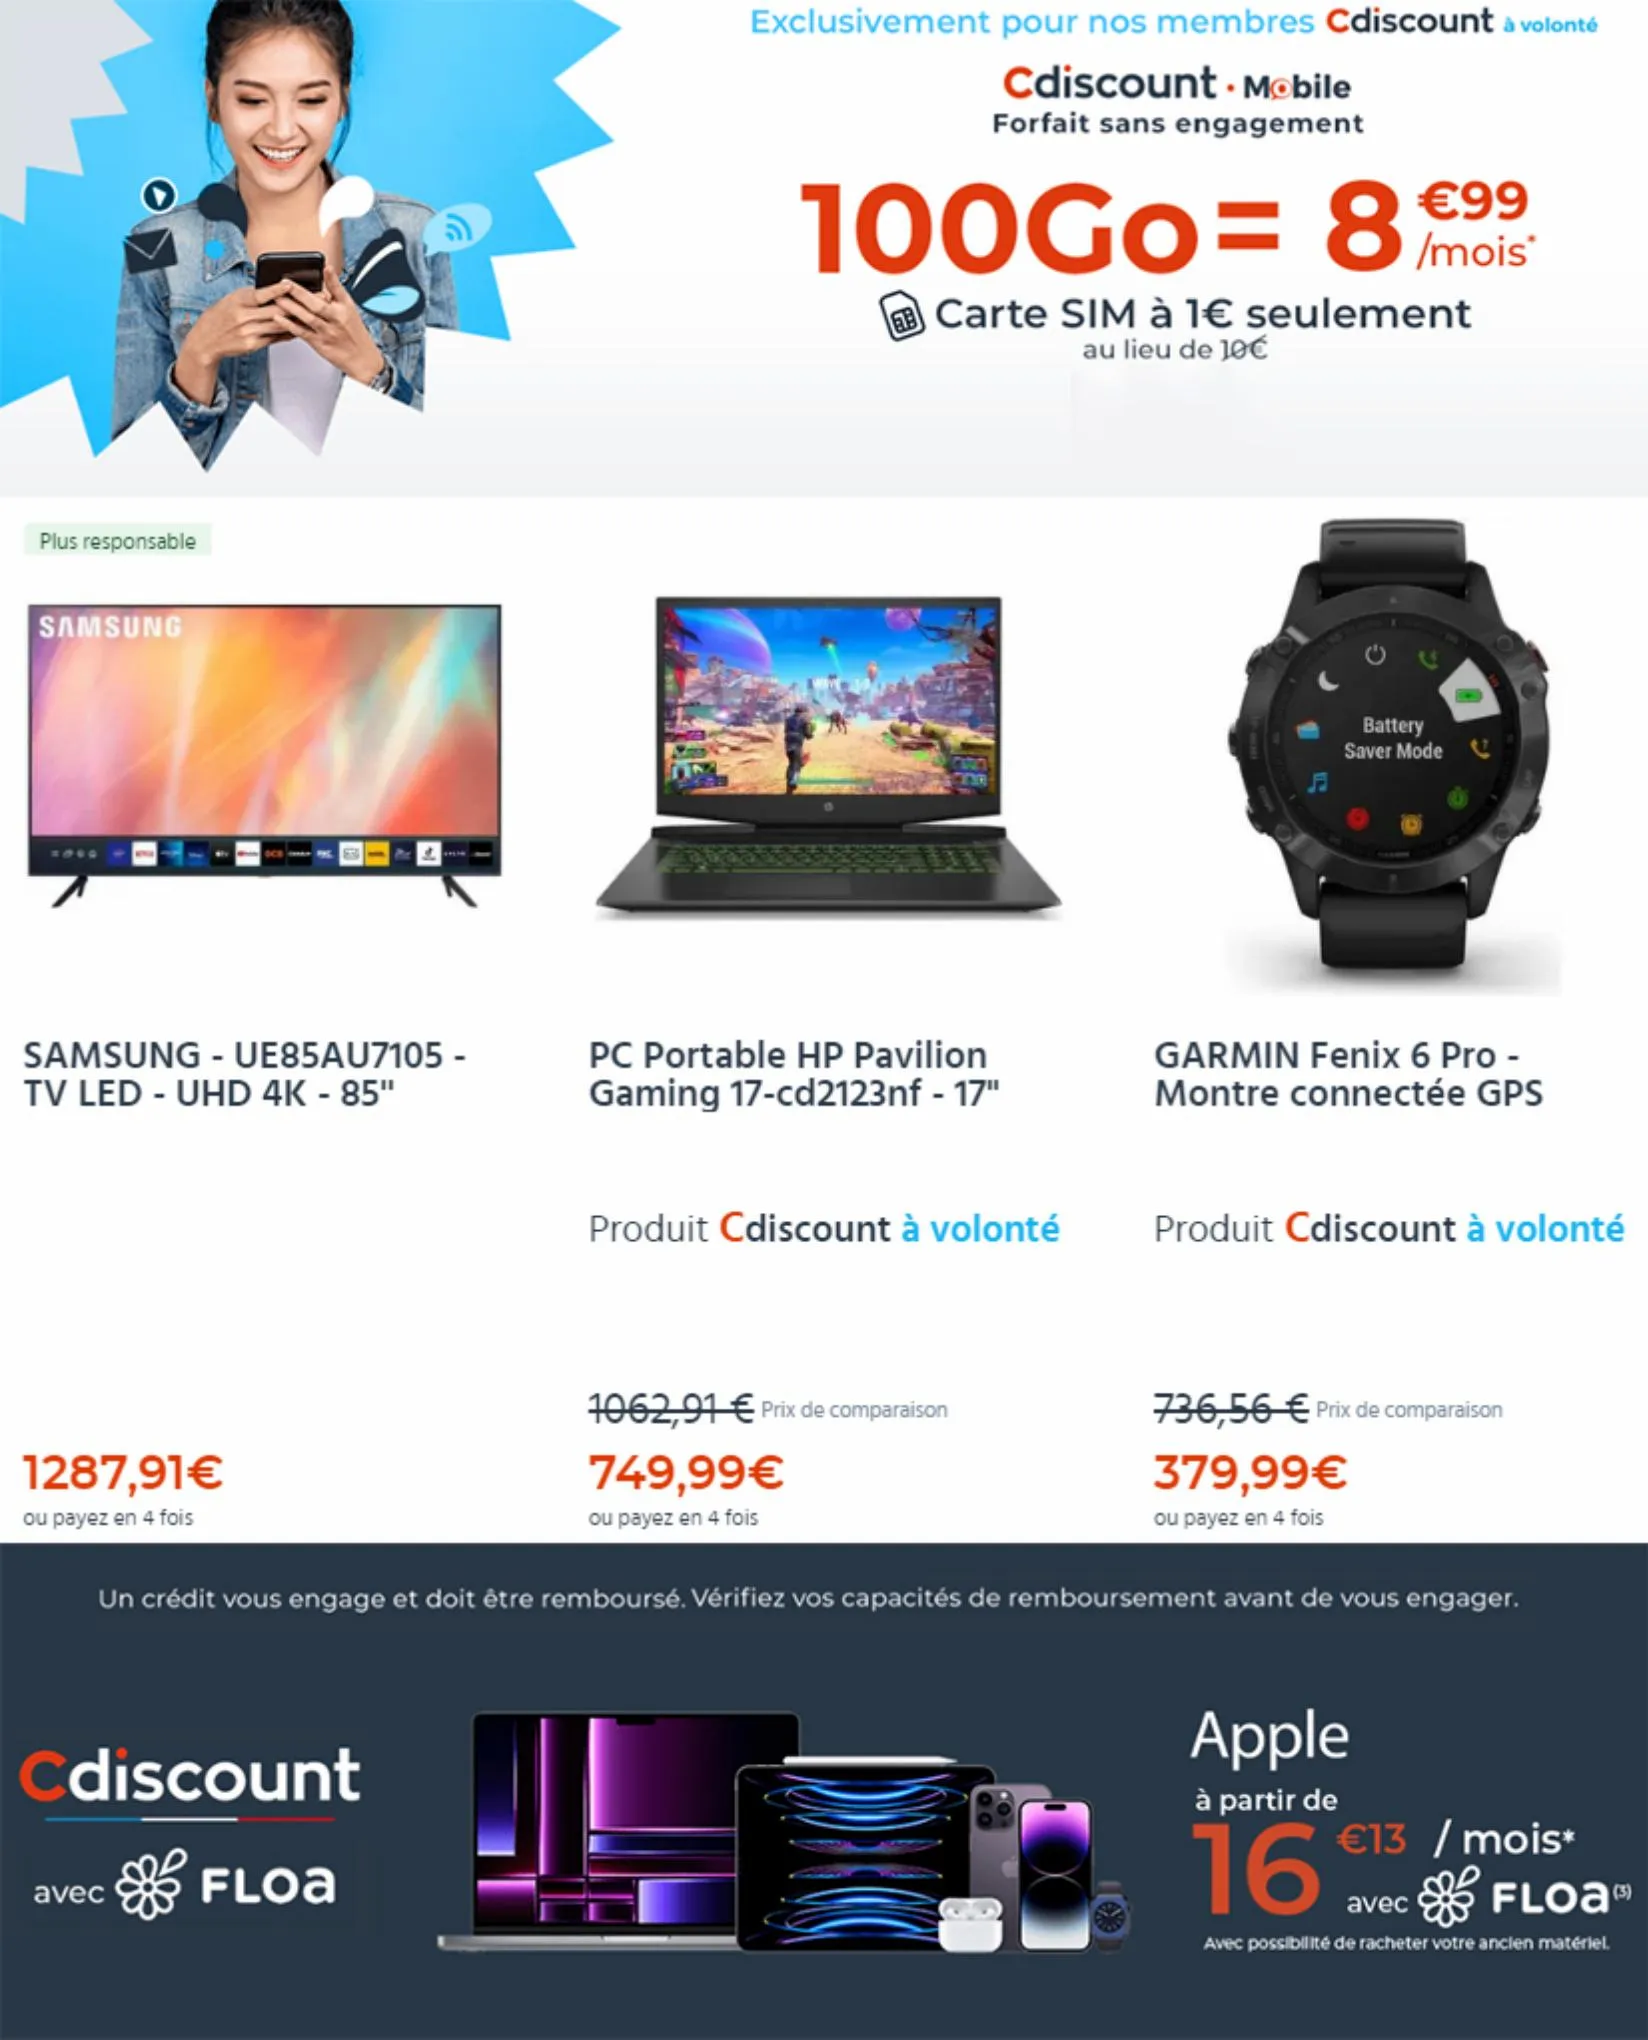 Catalogue Offres Speciales Cdiscount, page 00003